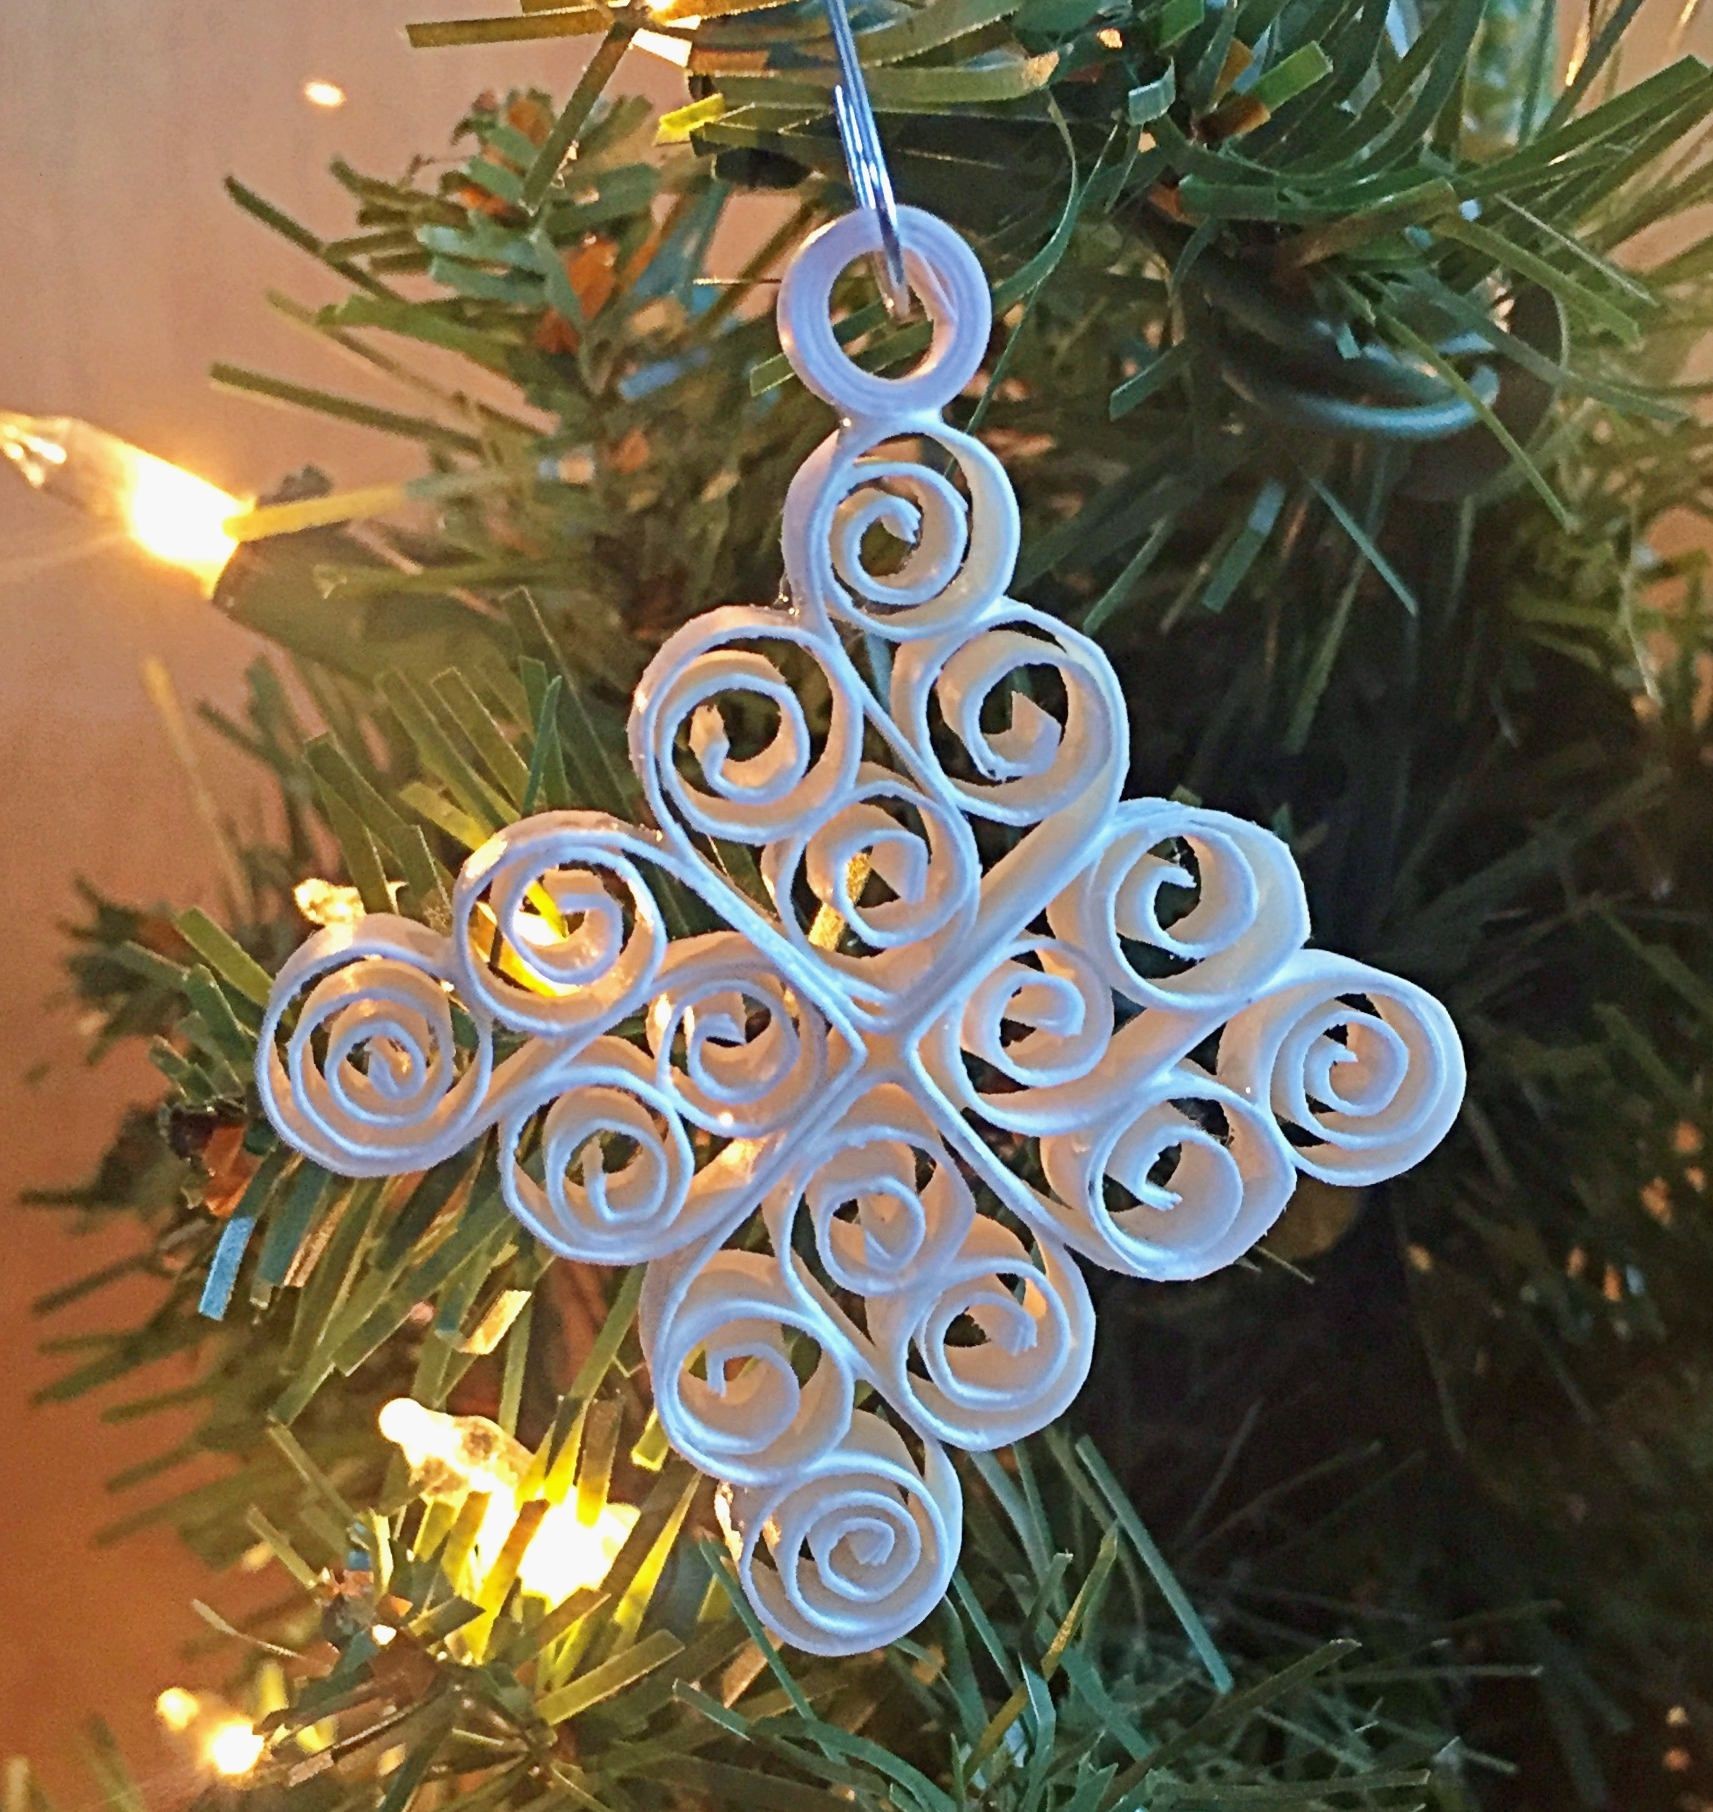 Papercraft Christmas ornaments ornament Decoration Snowflake Quilled Paper Quilling Christmas